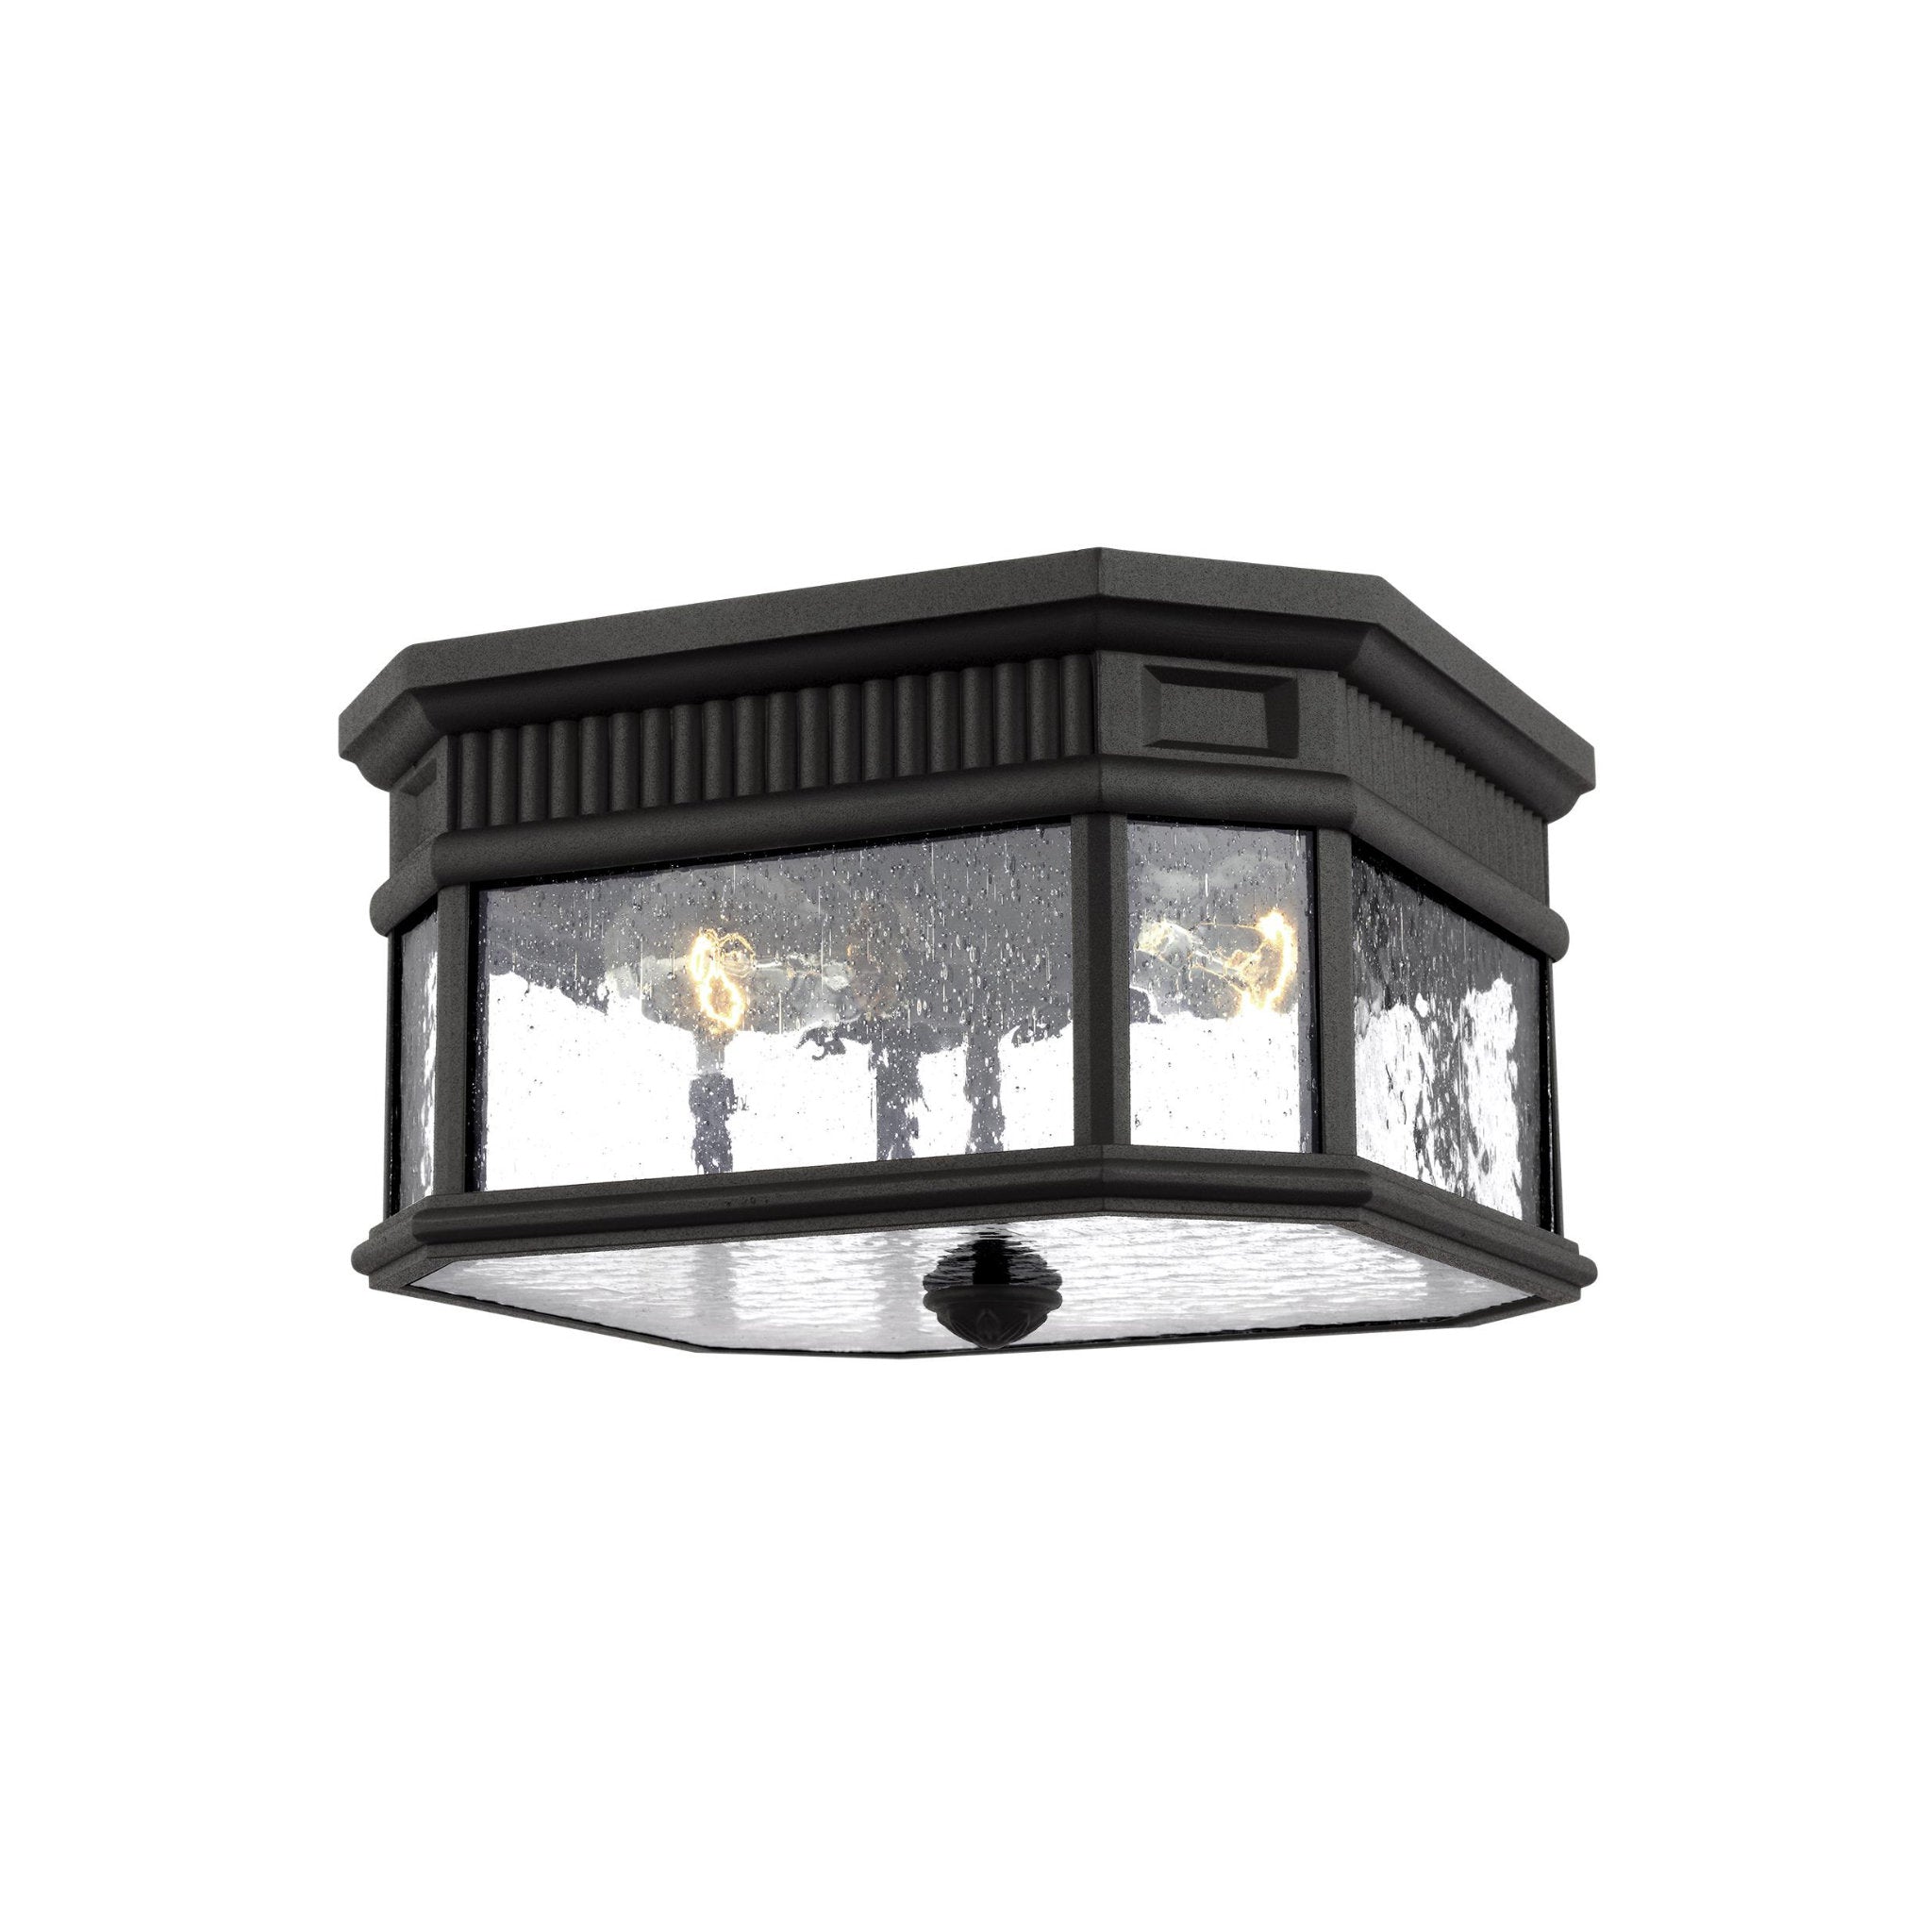 Cotswold Lane Flush Mount Traditional Outdoor Fixture 11.5" Width 6.625" Height Aluminum Rectangular Clear Seeded Shade in Black